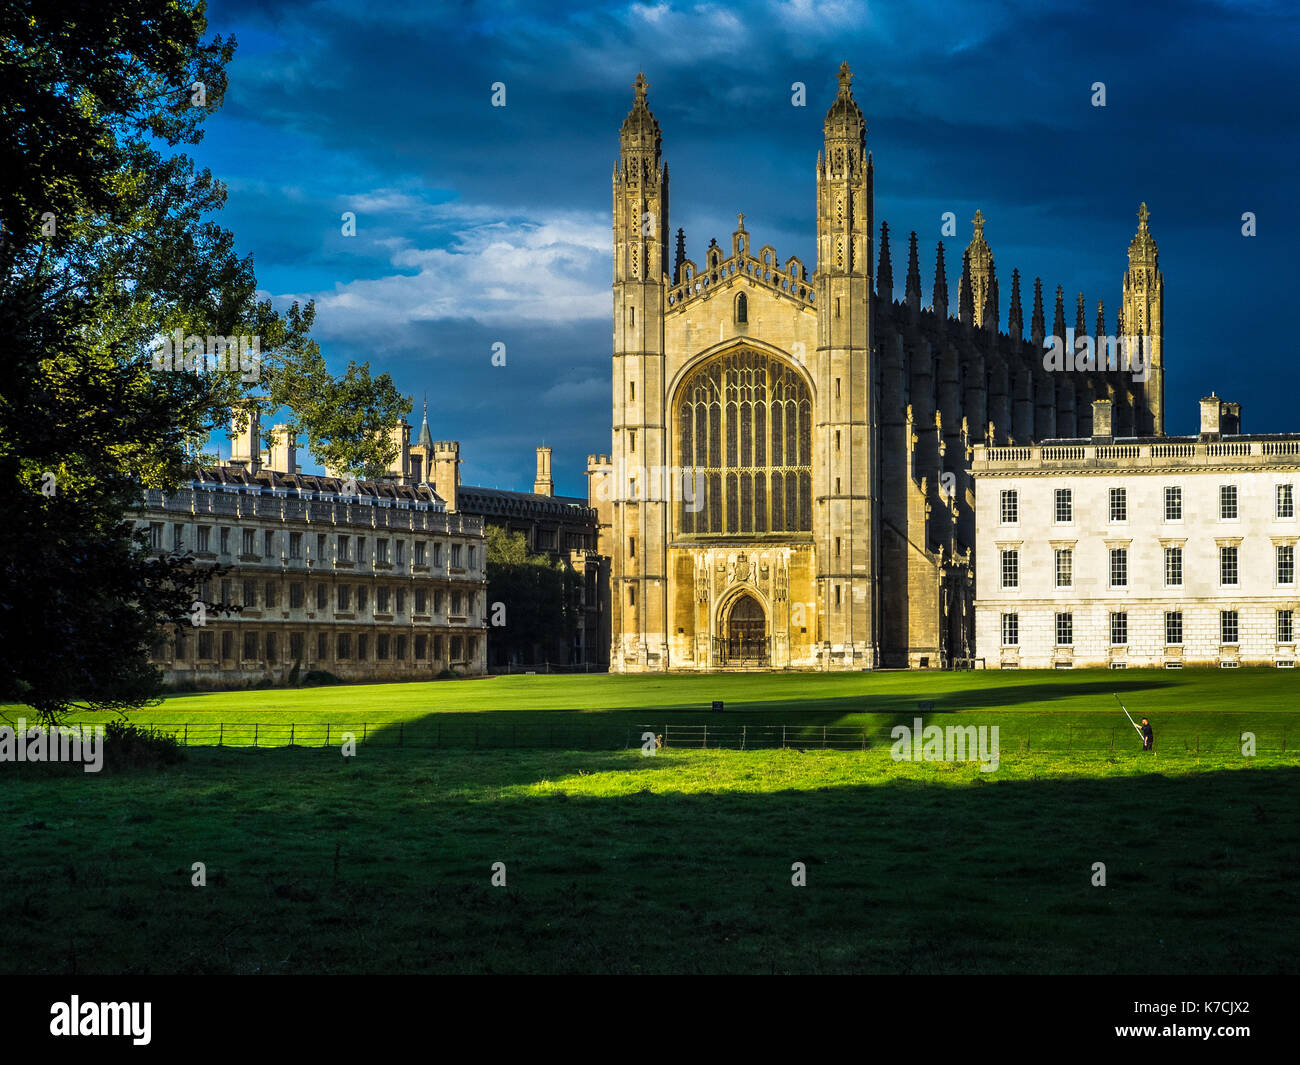 Cambridge University Kings College Chapel glows in the Sunset. The chapel, built between 1446 & 1515, is part of Kings College University of Cambridge Stock Photo